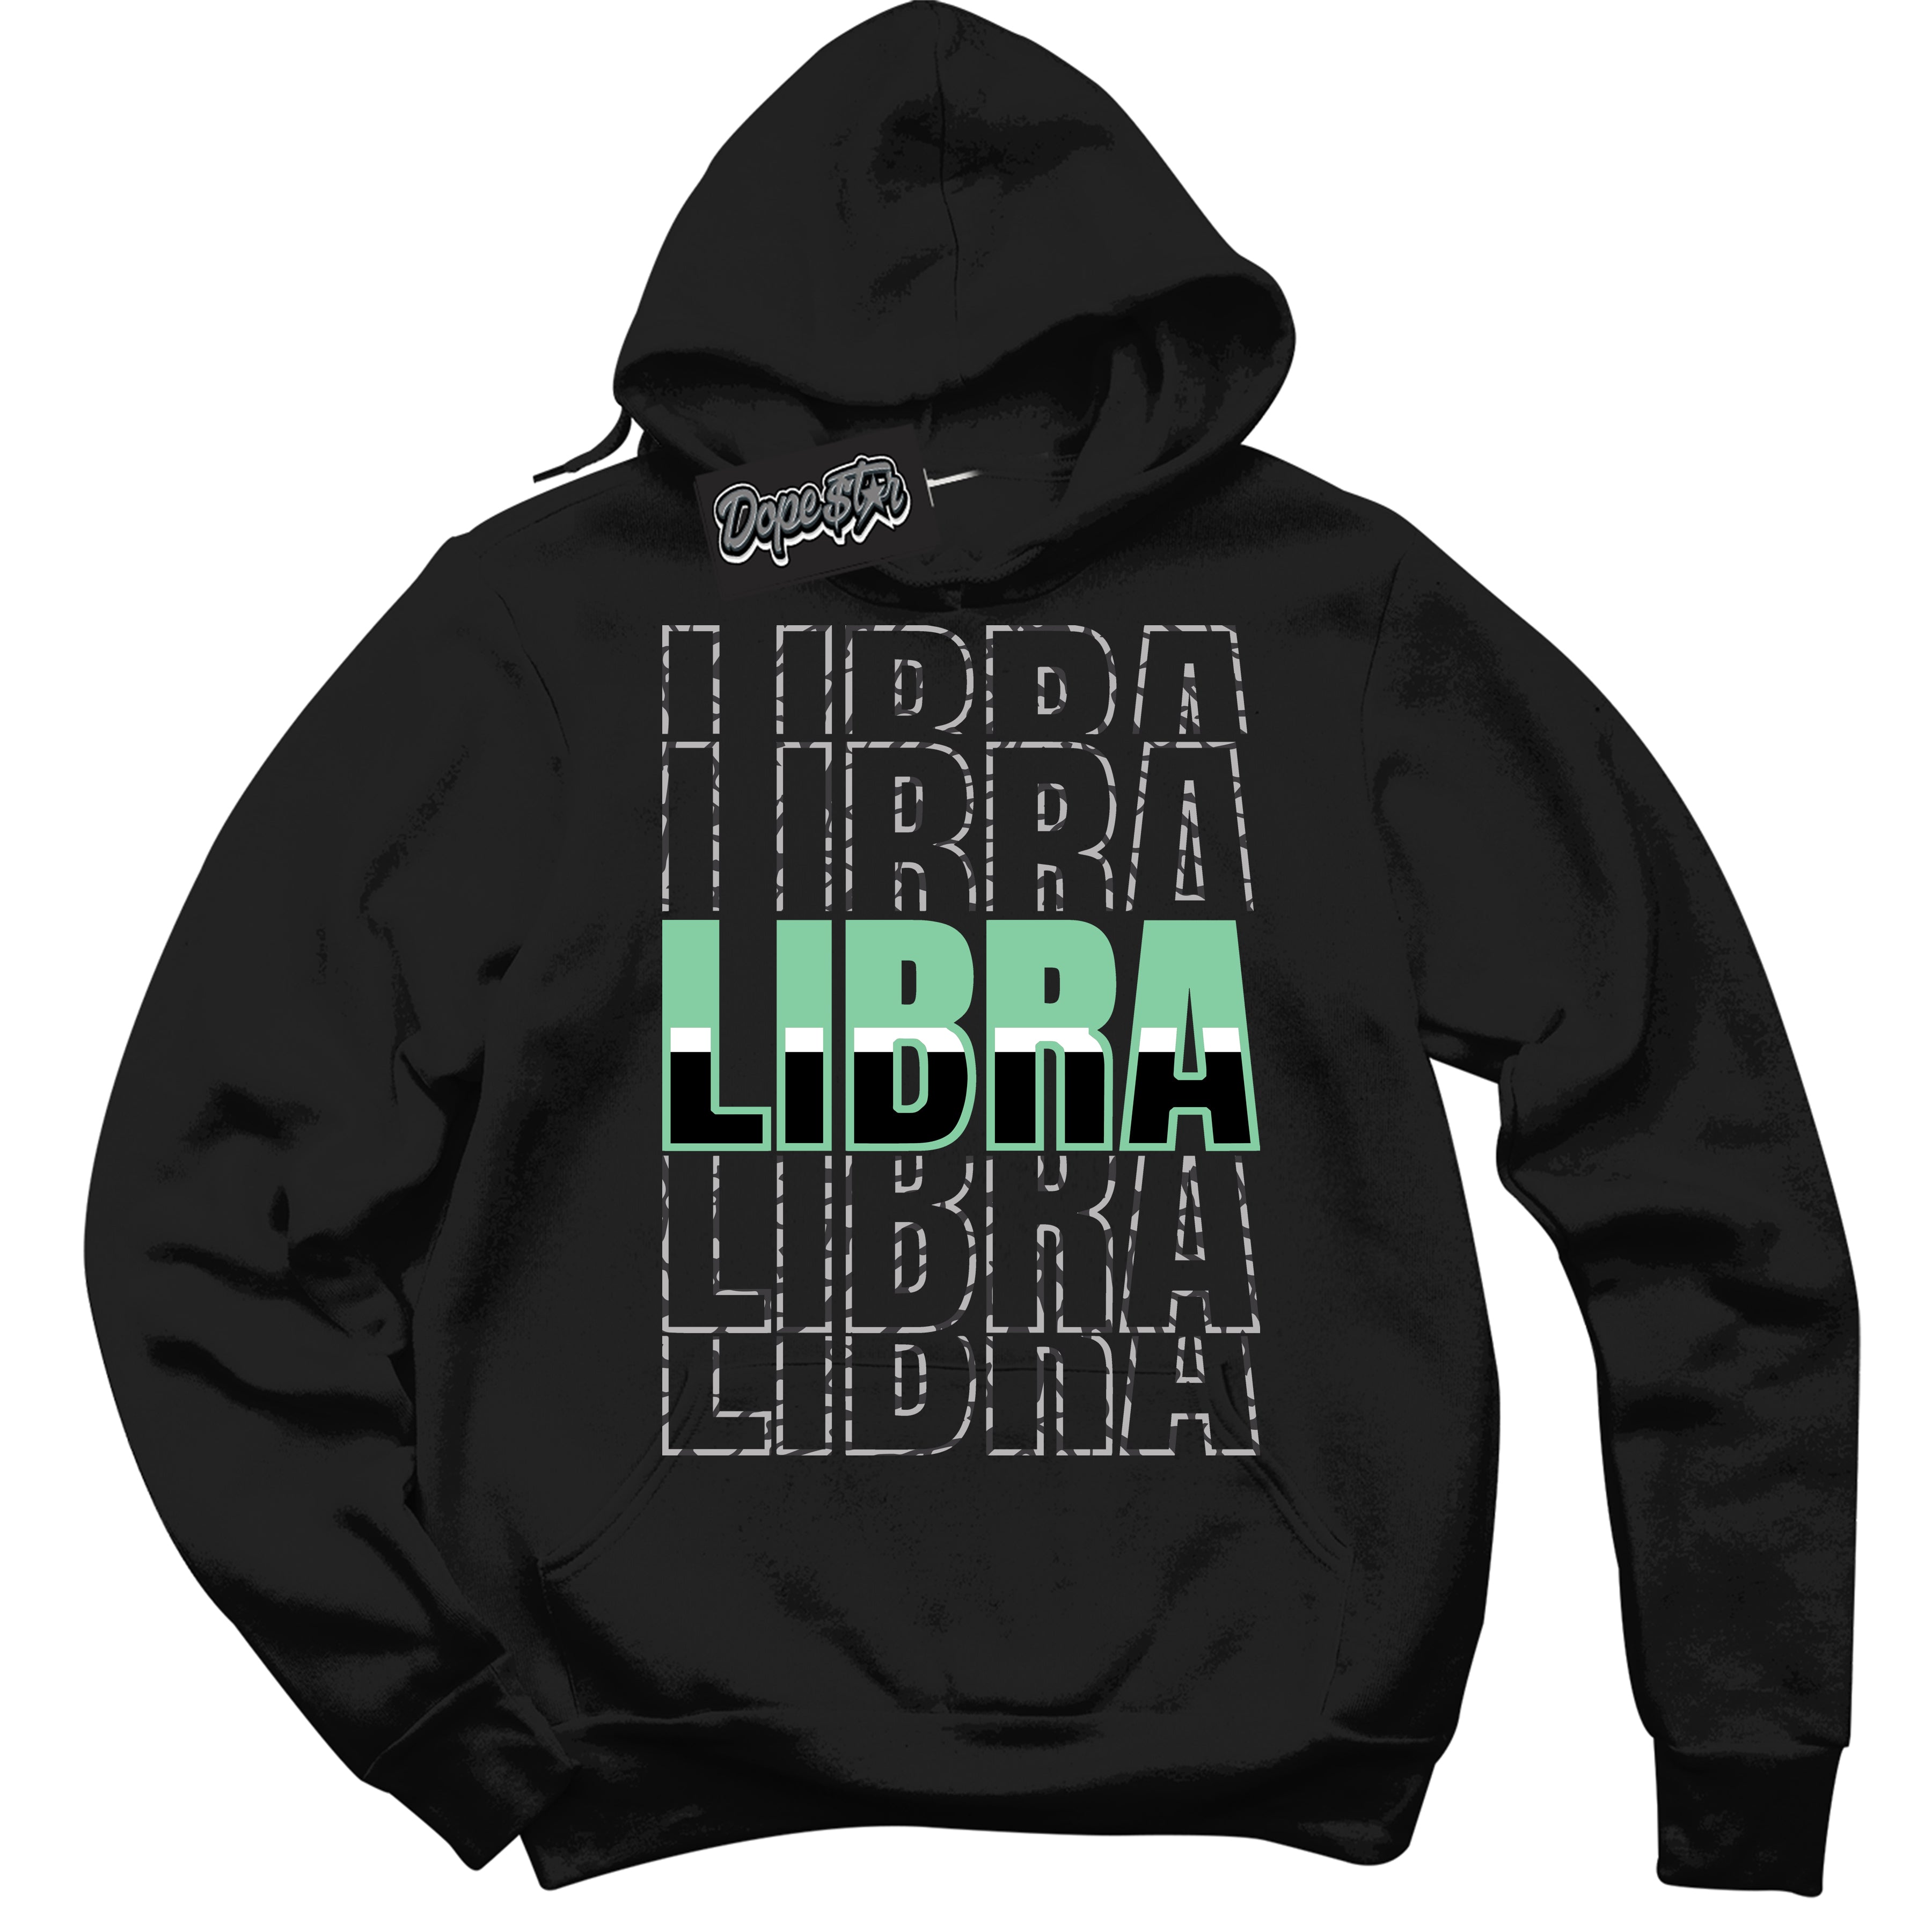 Cool Black Graphic DopeStar Hoodie with “ Libra “ print, that perfectly matches Green Glow 3S sneakers